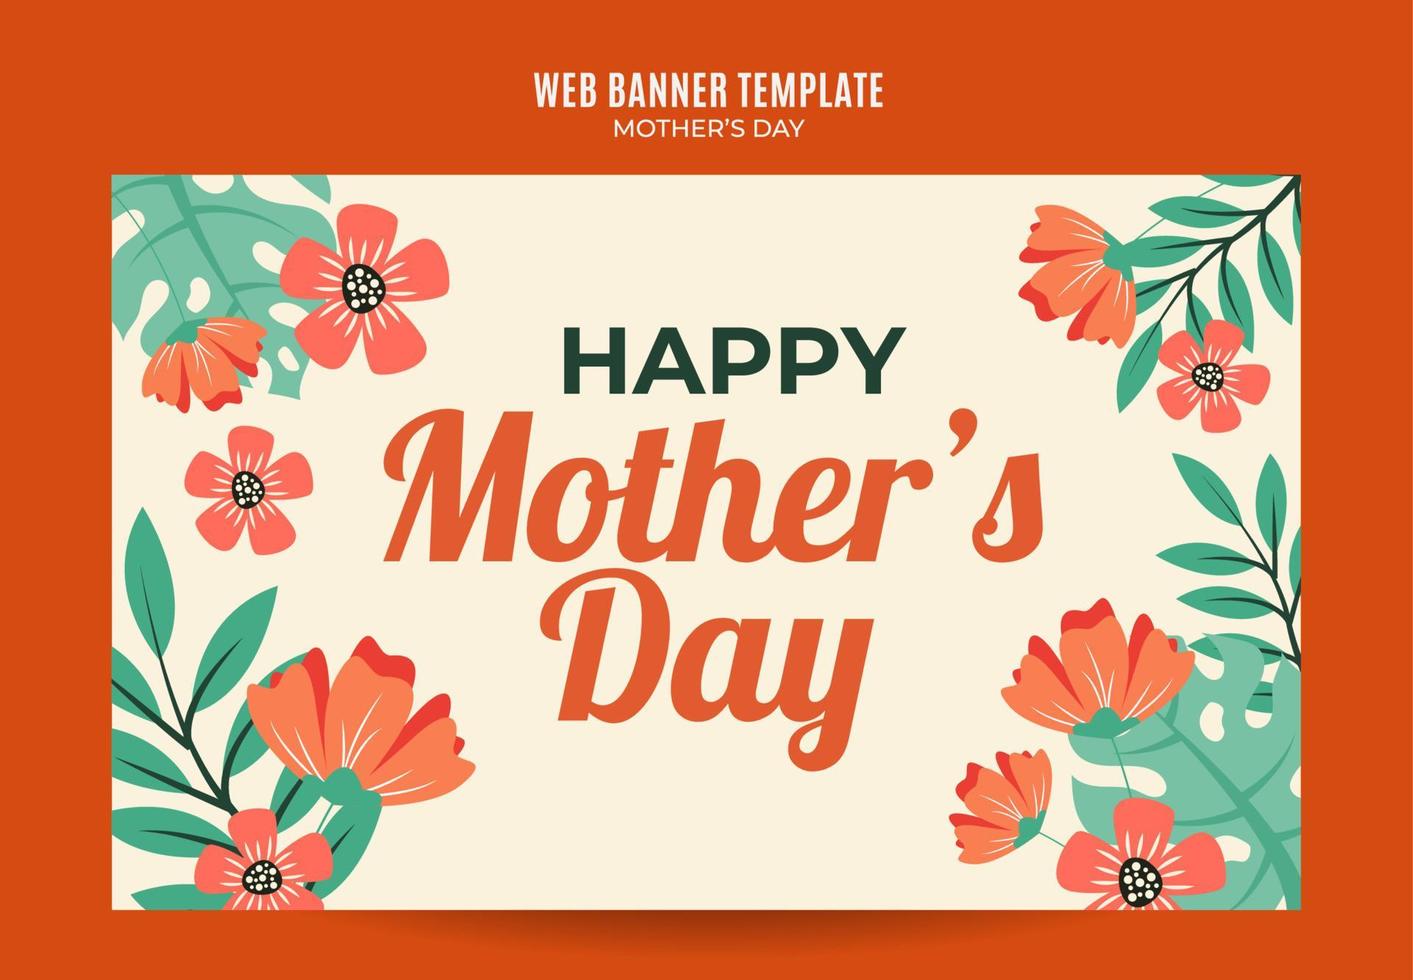 Happy Mother's Day Retro Web Banner for Social Media Poster, banner, space area and background vector